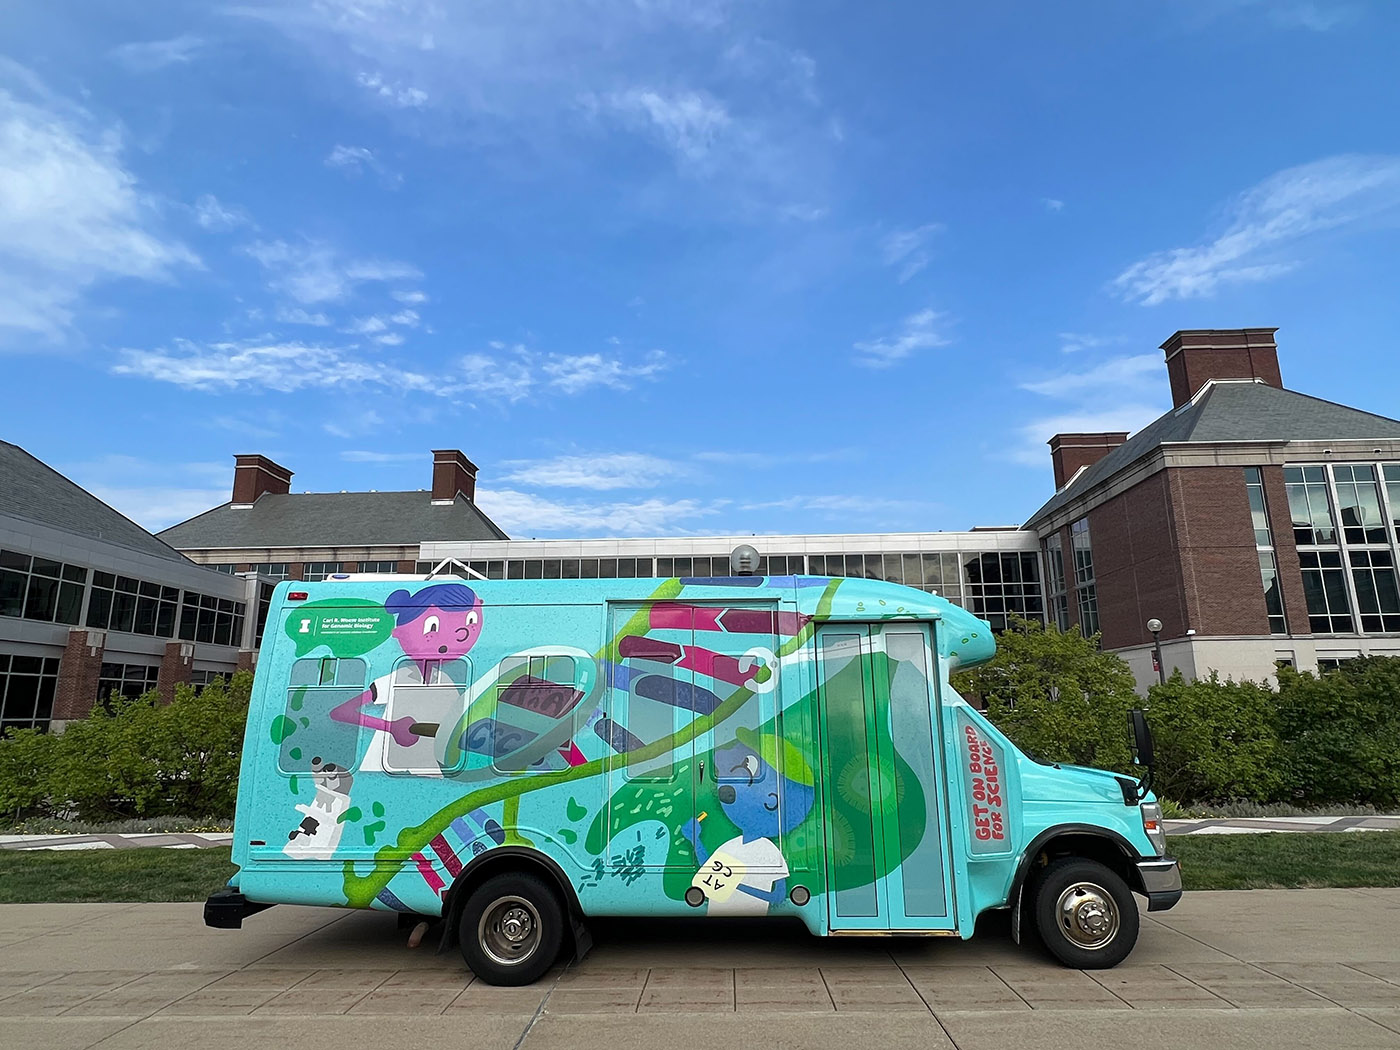 Mobile Science Learning Lab